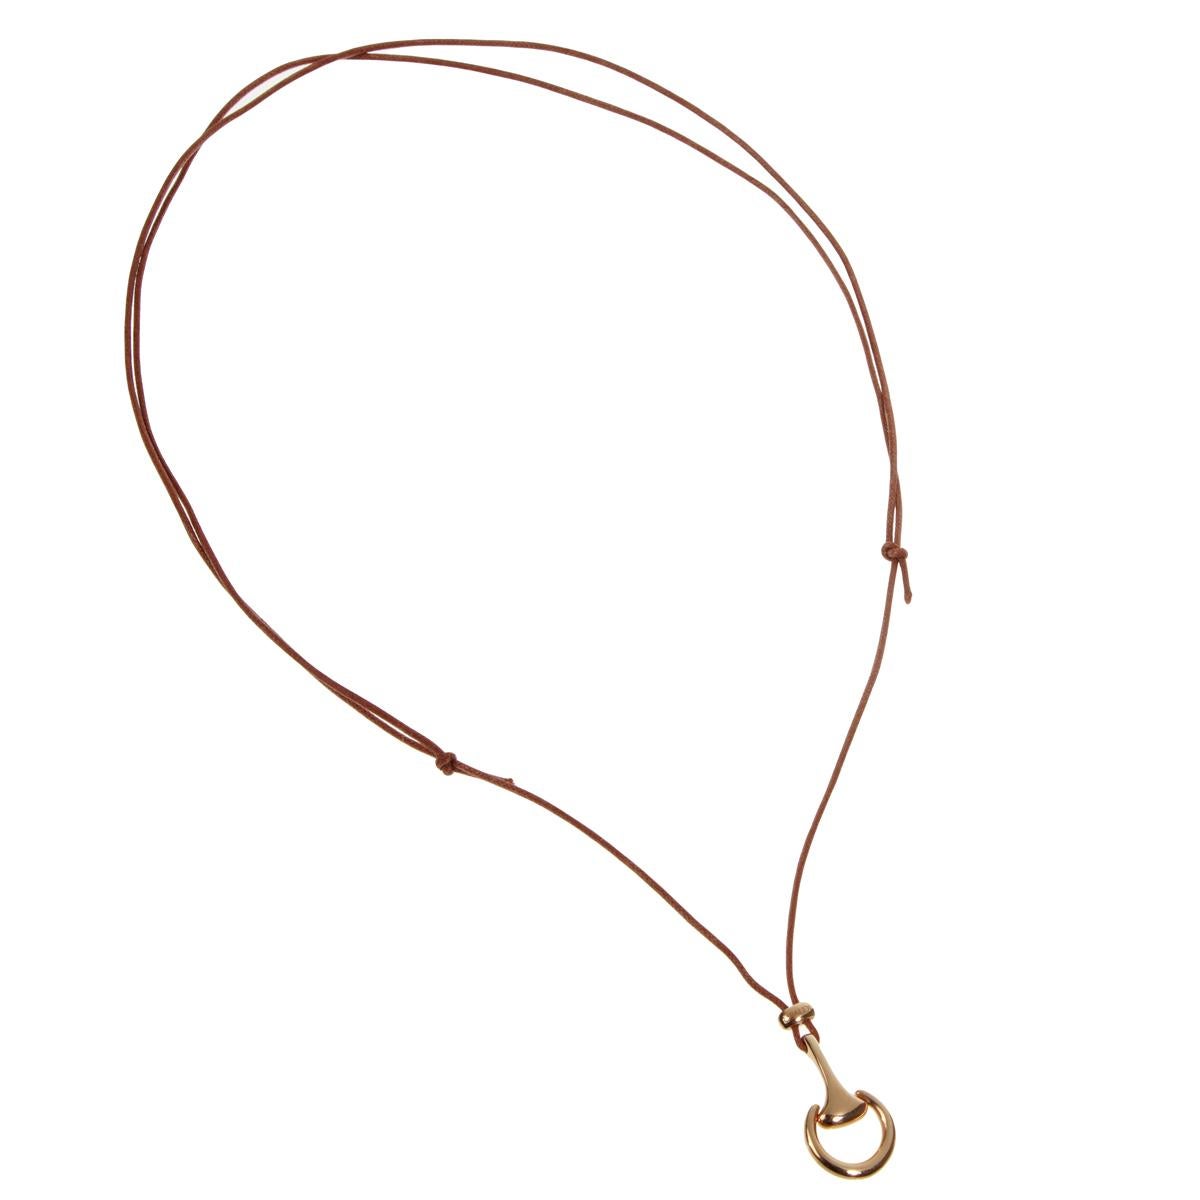 A fine necklace showcasing an 18k rose gold horsebit motif suspended by a brown leather cord adjustable up to 30